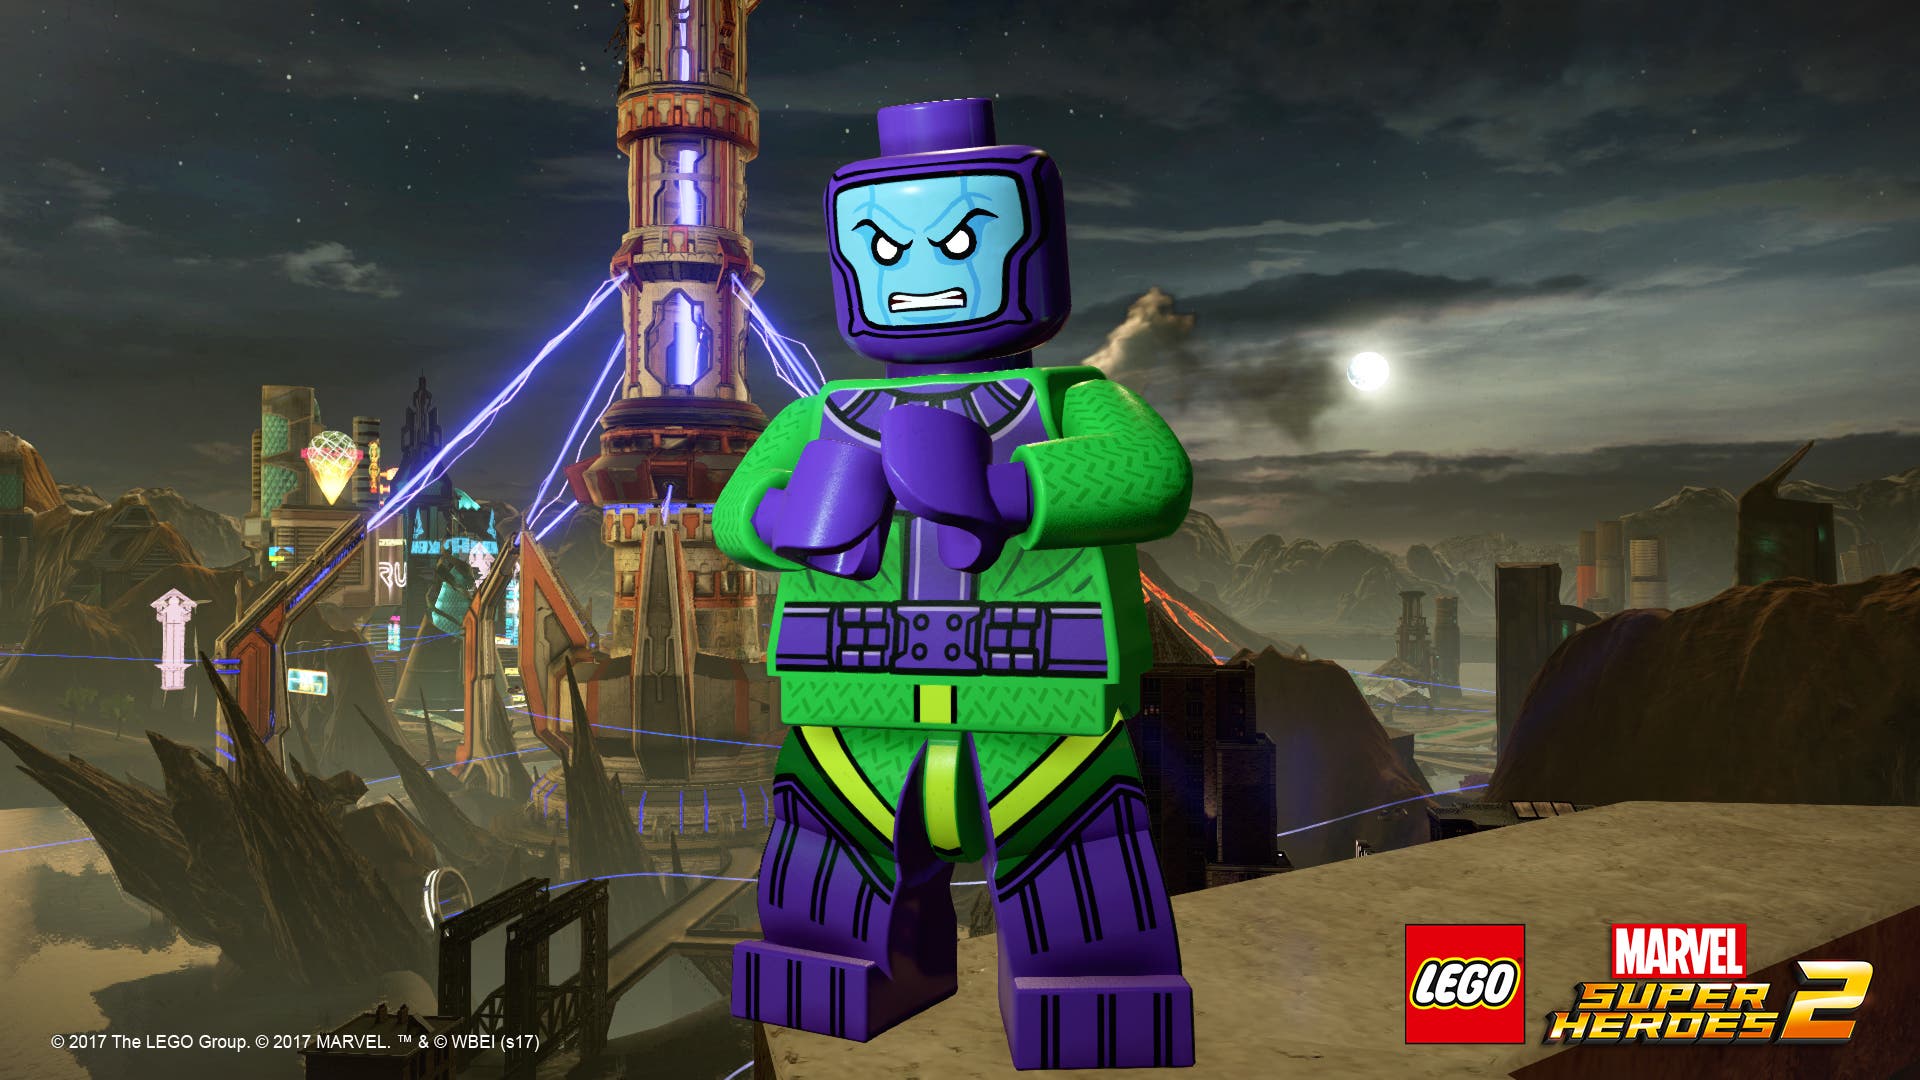 LEGO Marvel Super Heroes 2 Kang the Conqueror 1507794994